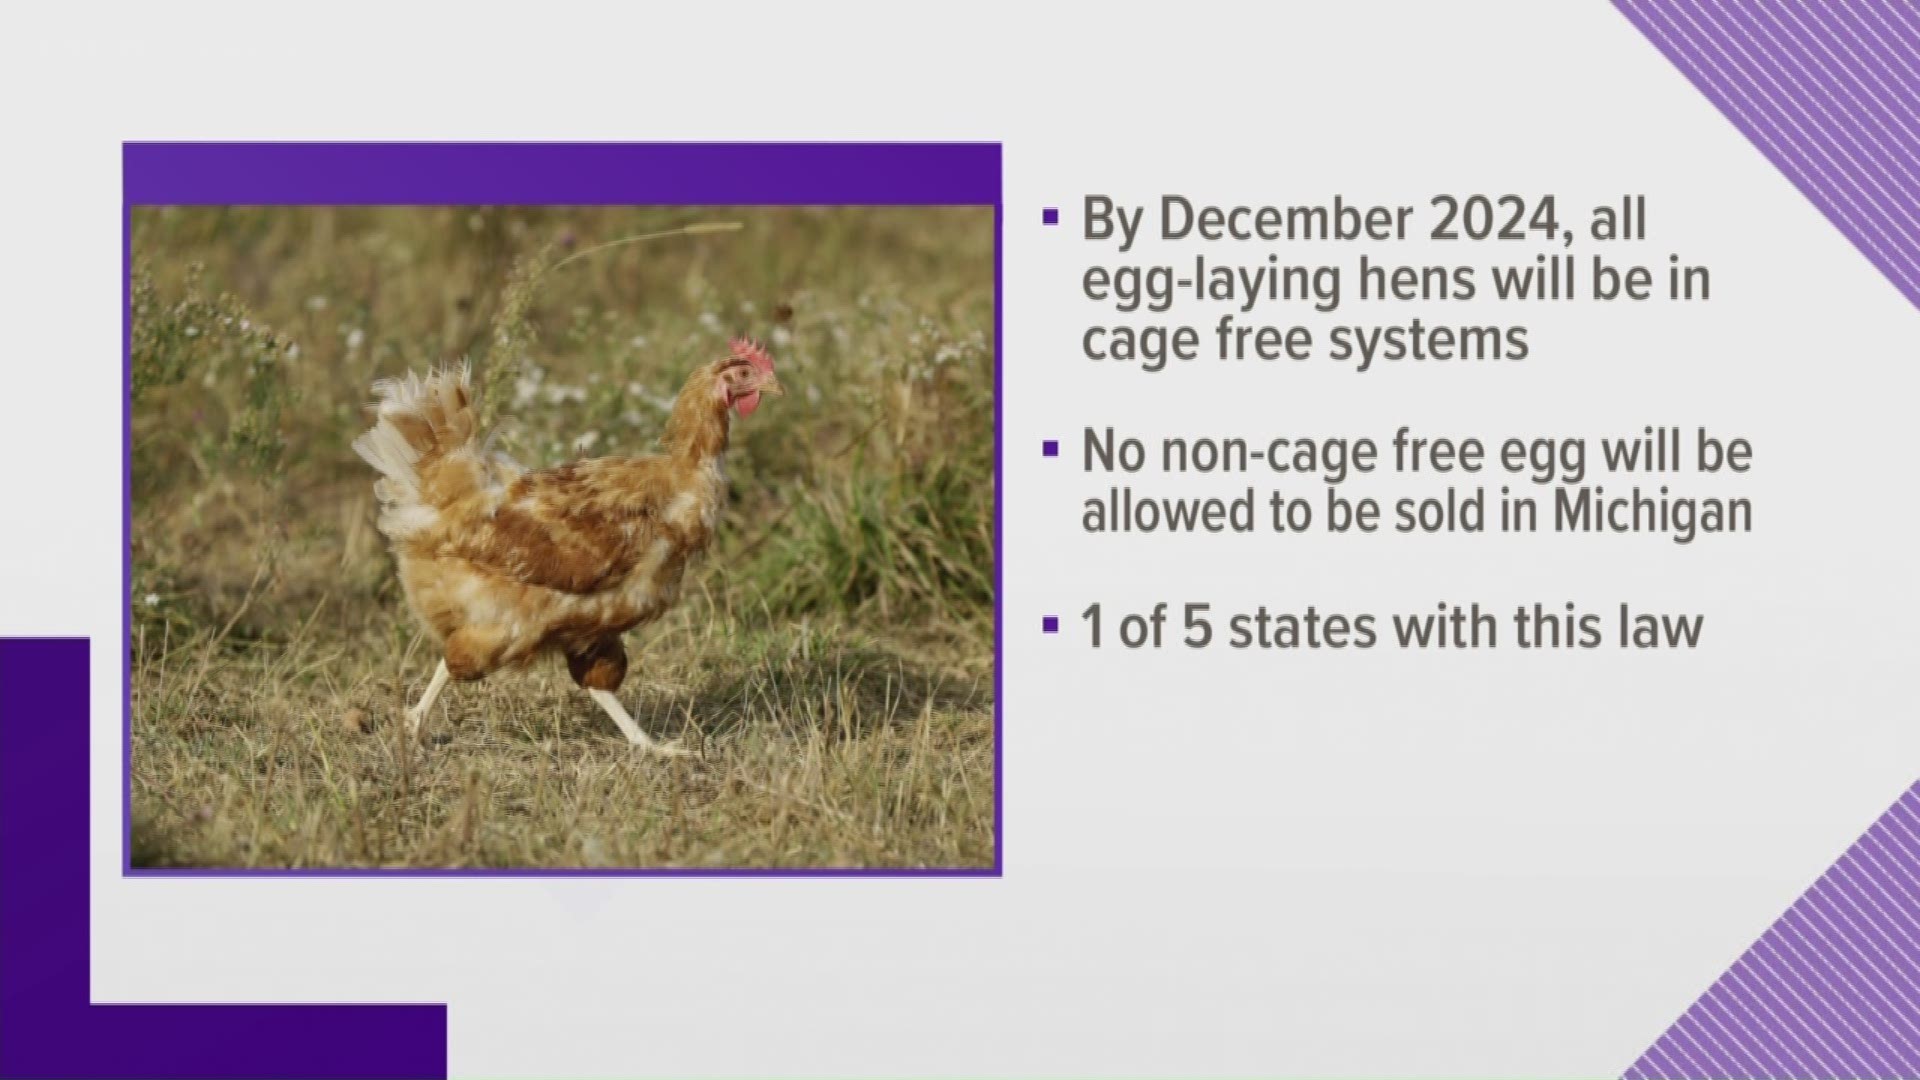 The law will also prohibit non-cage-free eggs from being sold in Michigan starting in 2025.